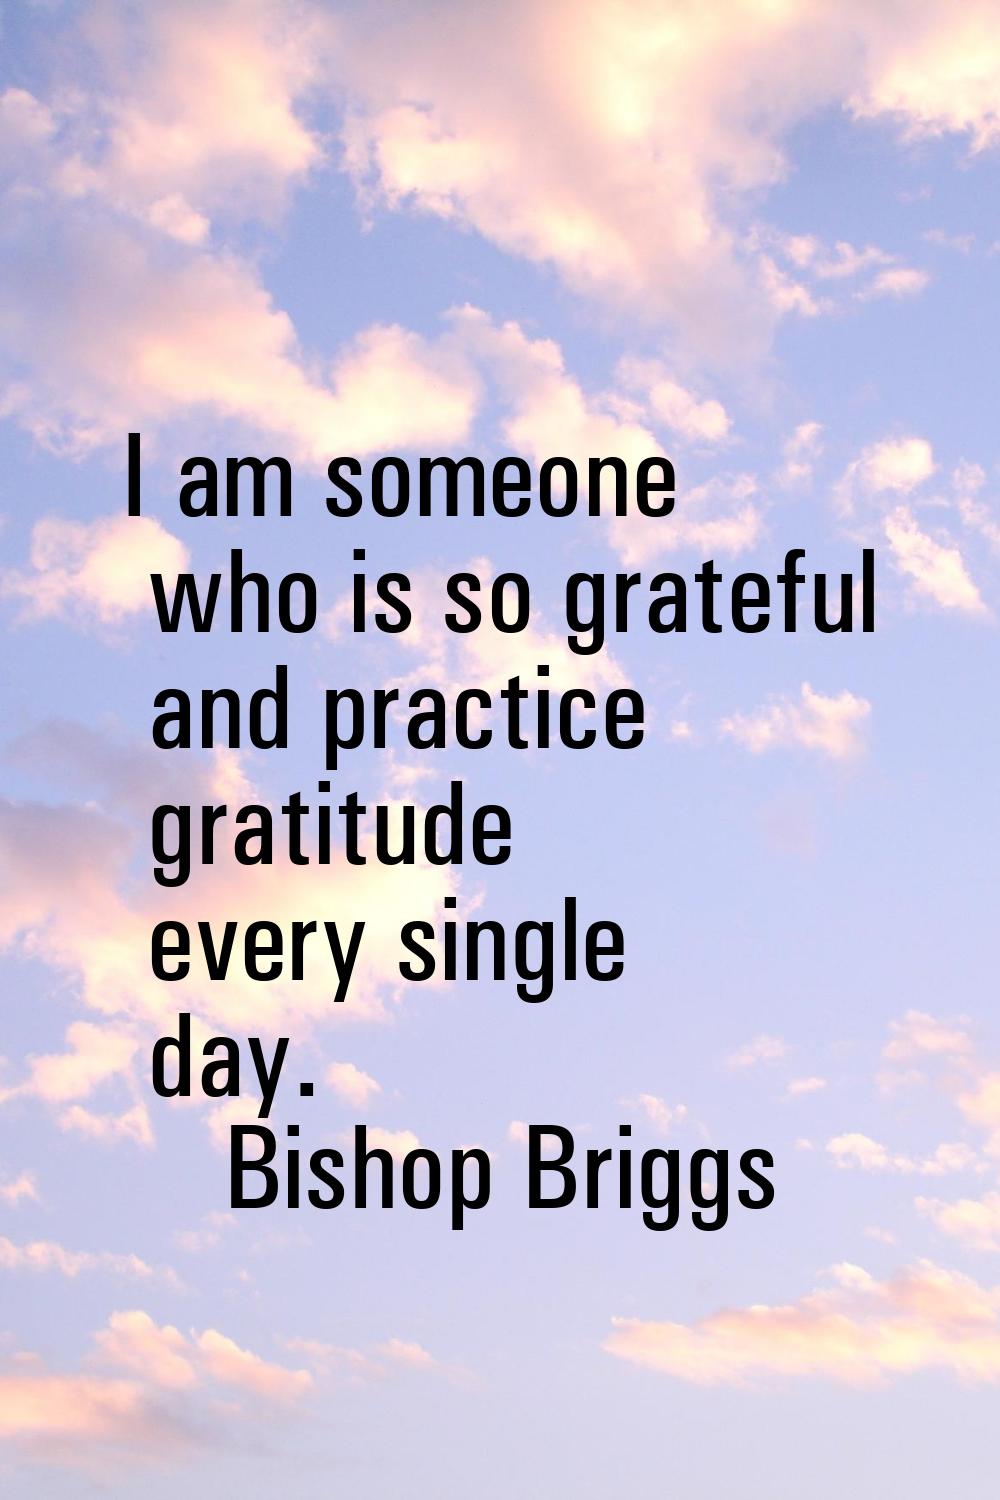 I am someone who is so grateful and practice gratitude every single day.